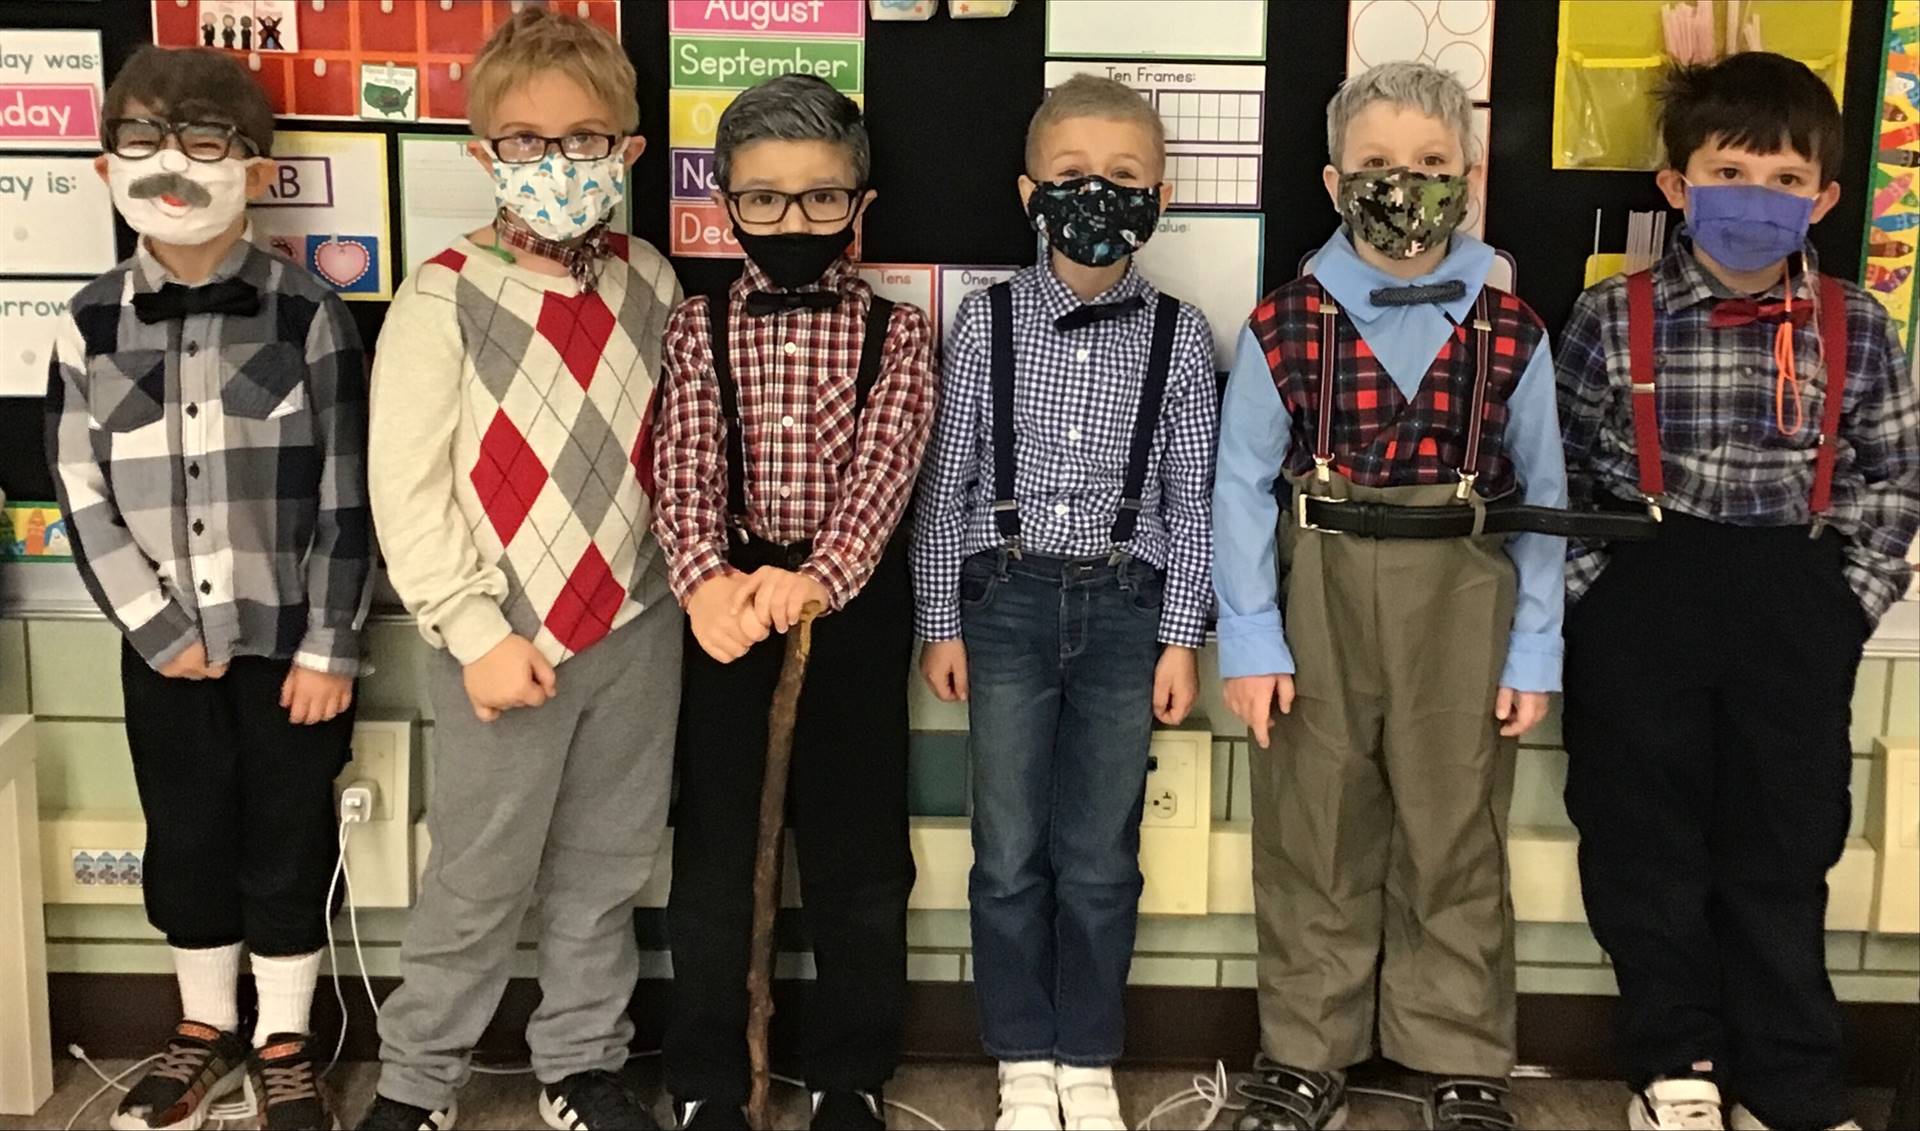 100th Day of School